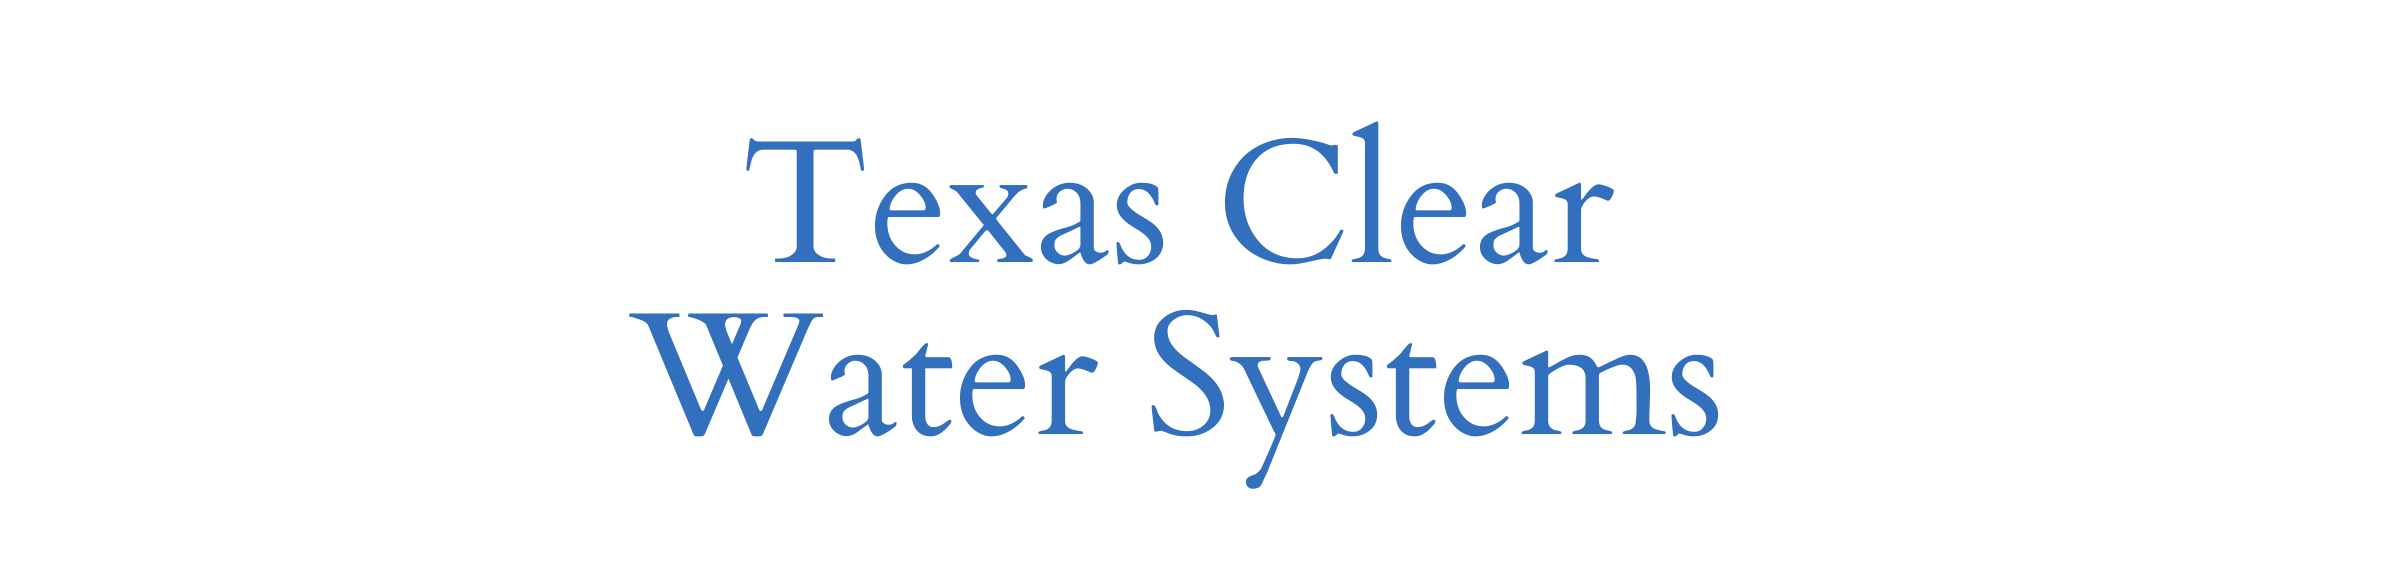 Texas Clear Water Systems